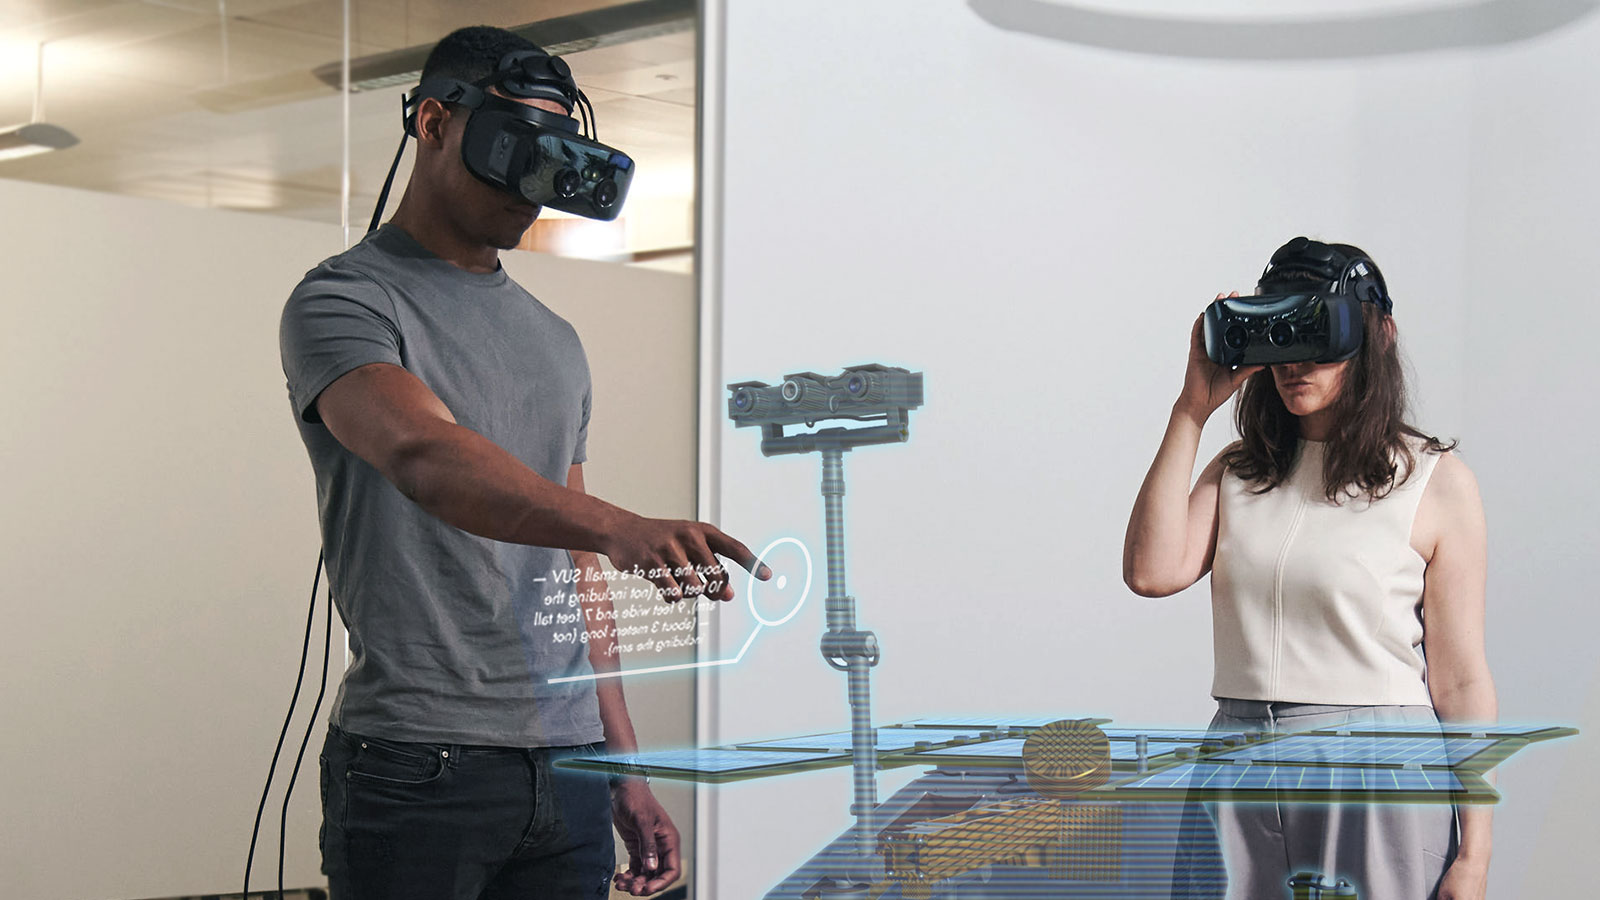 How Useful Is Virtual Reality For Training